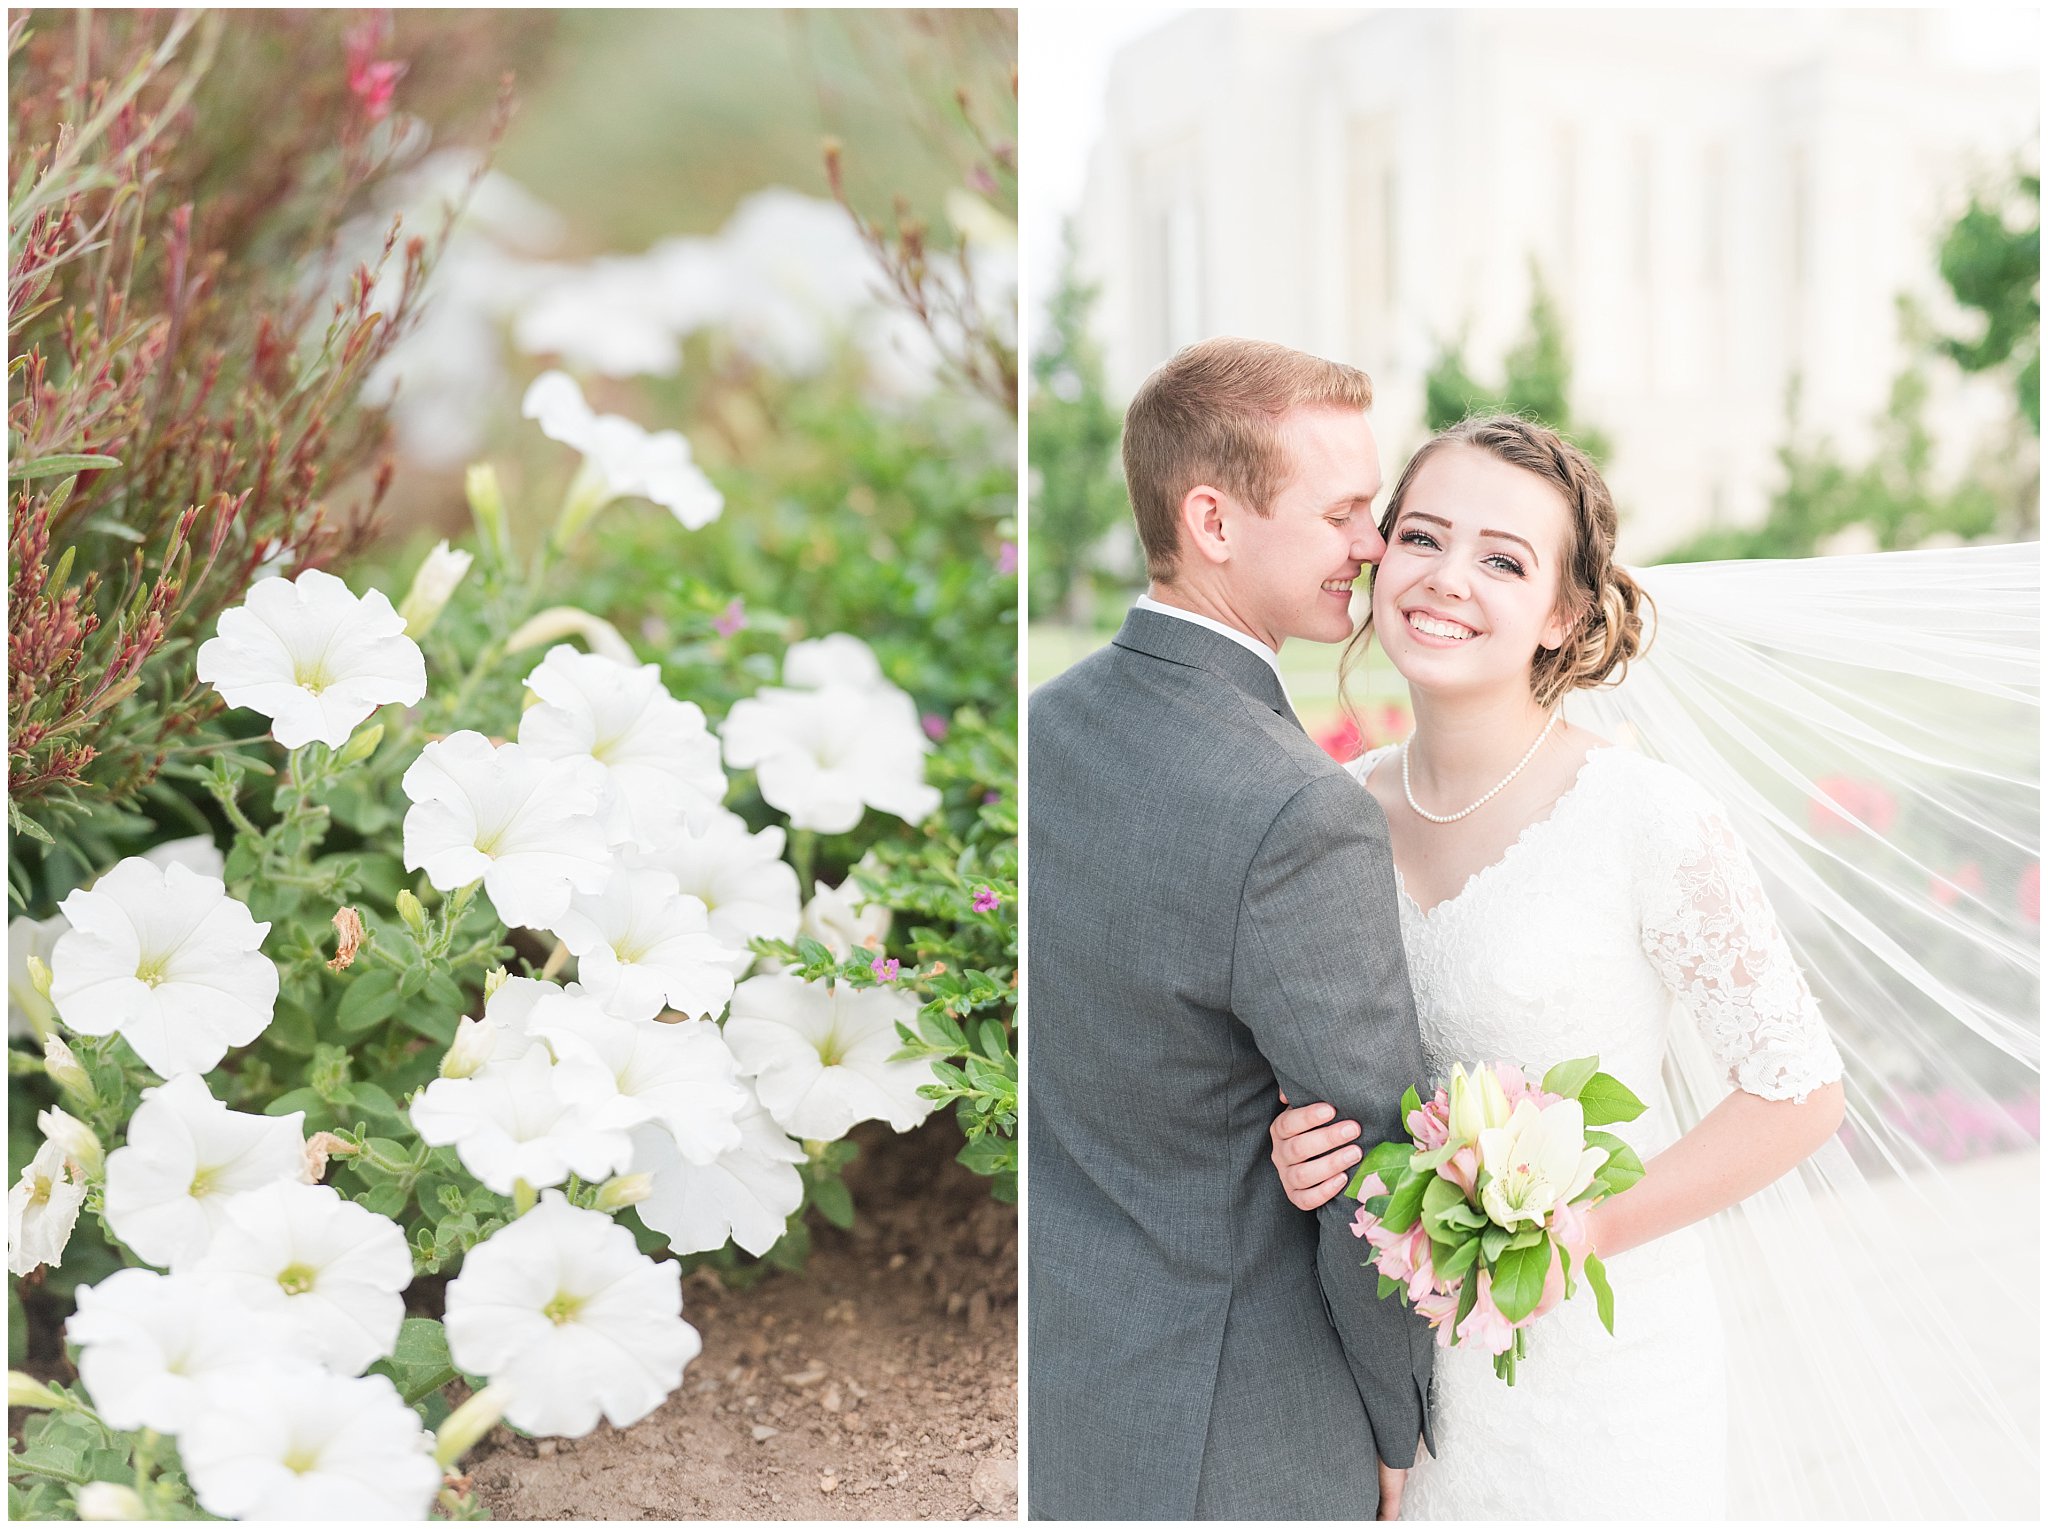 Bride and groom portraits with bride in elegant lace dress and veil, groom in grey suit and light blue tie | Ogden Temple Summer Formal Session | Ogden Temple Wedding | Jessie and Dallin Photography